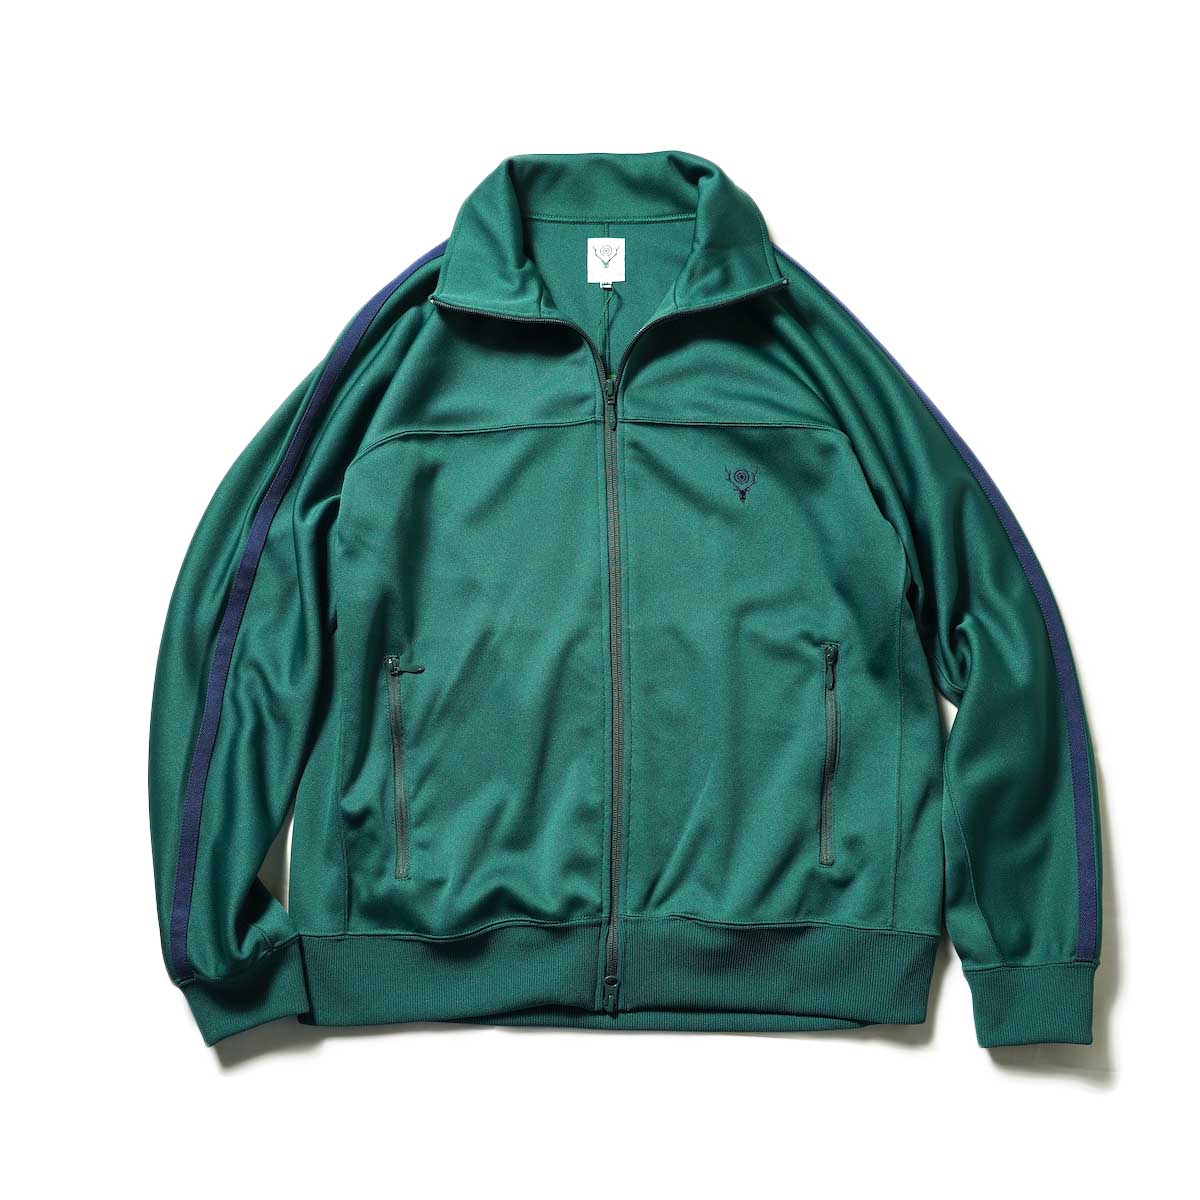 South2 West8 / Trainer Jacket - Poly Smooth (Green)